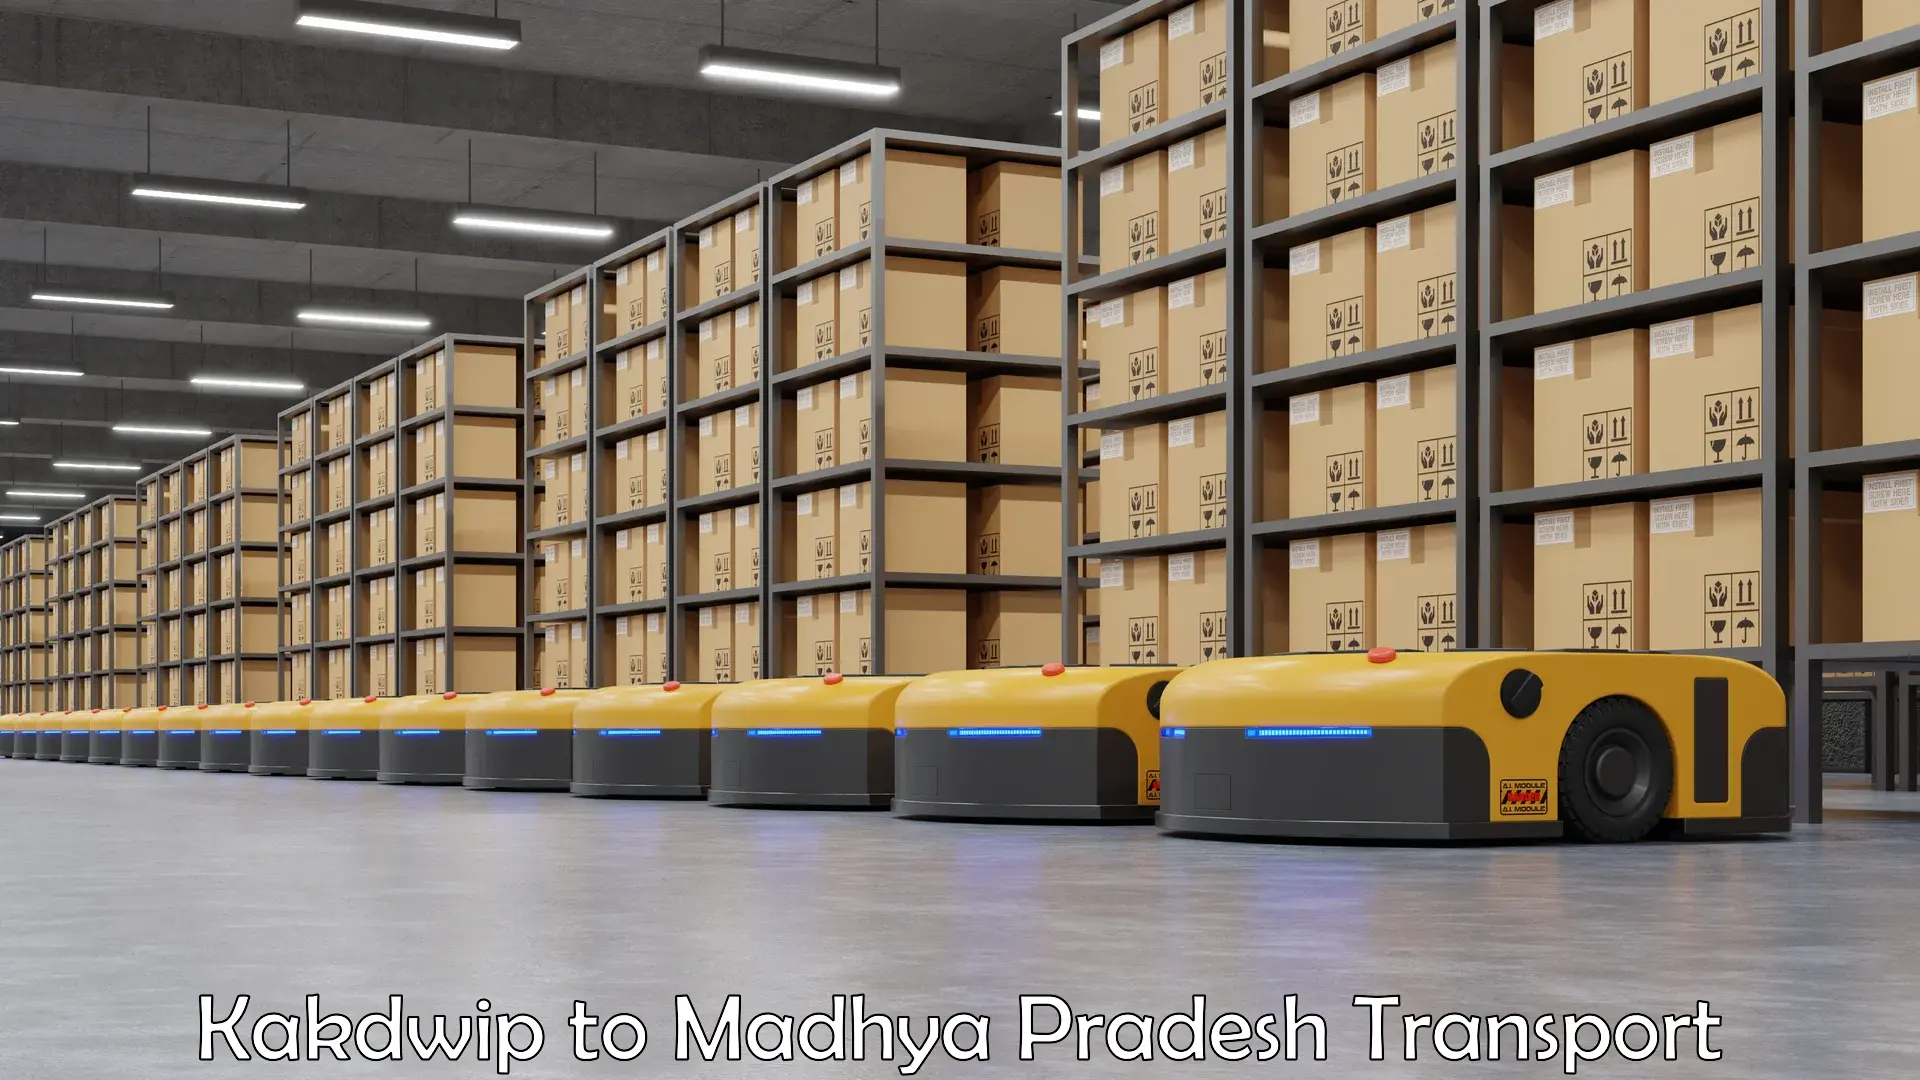 Truck transport companies in India Kakdwip to Prithvipur